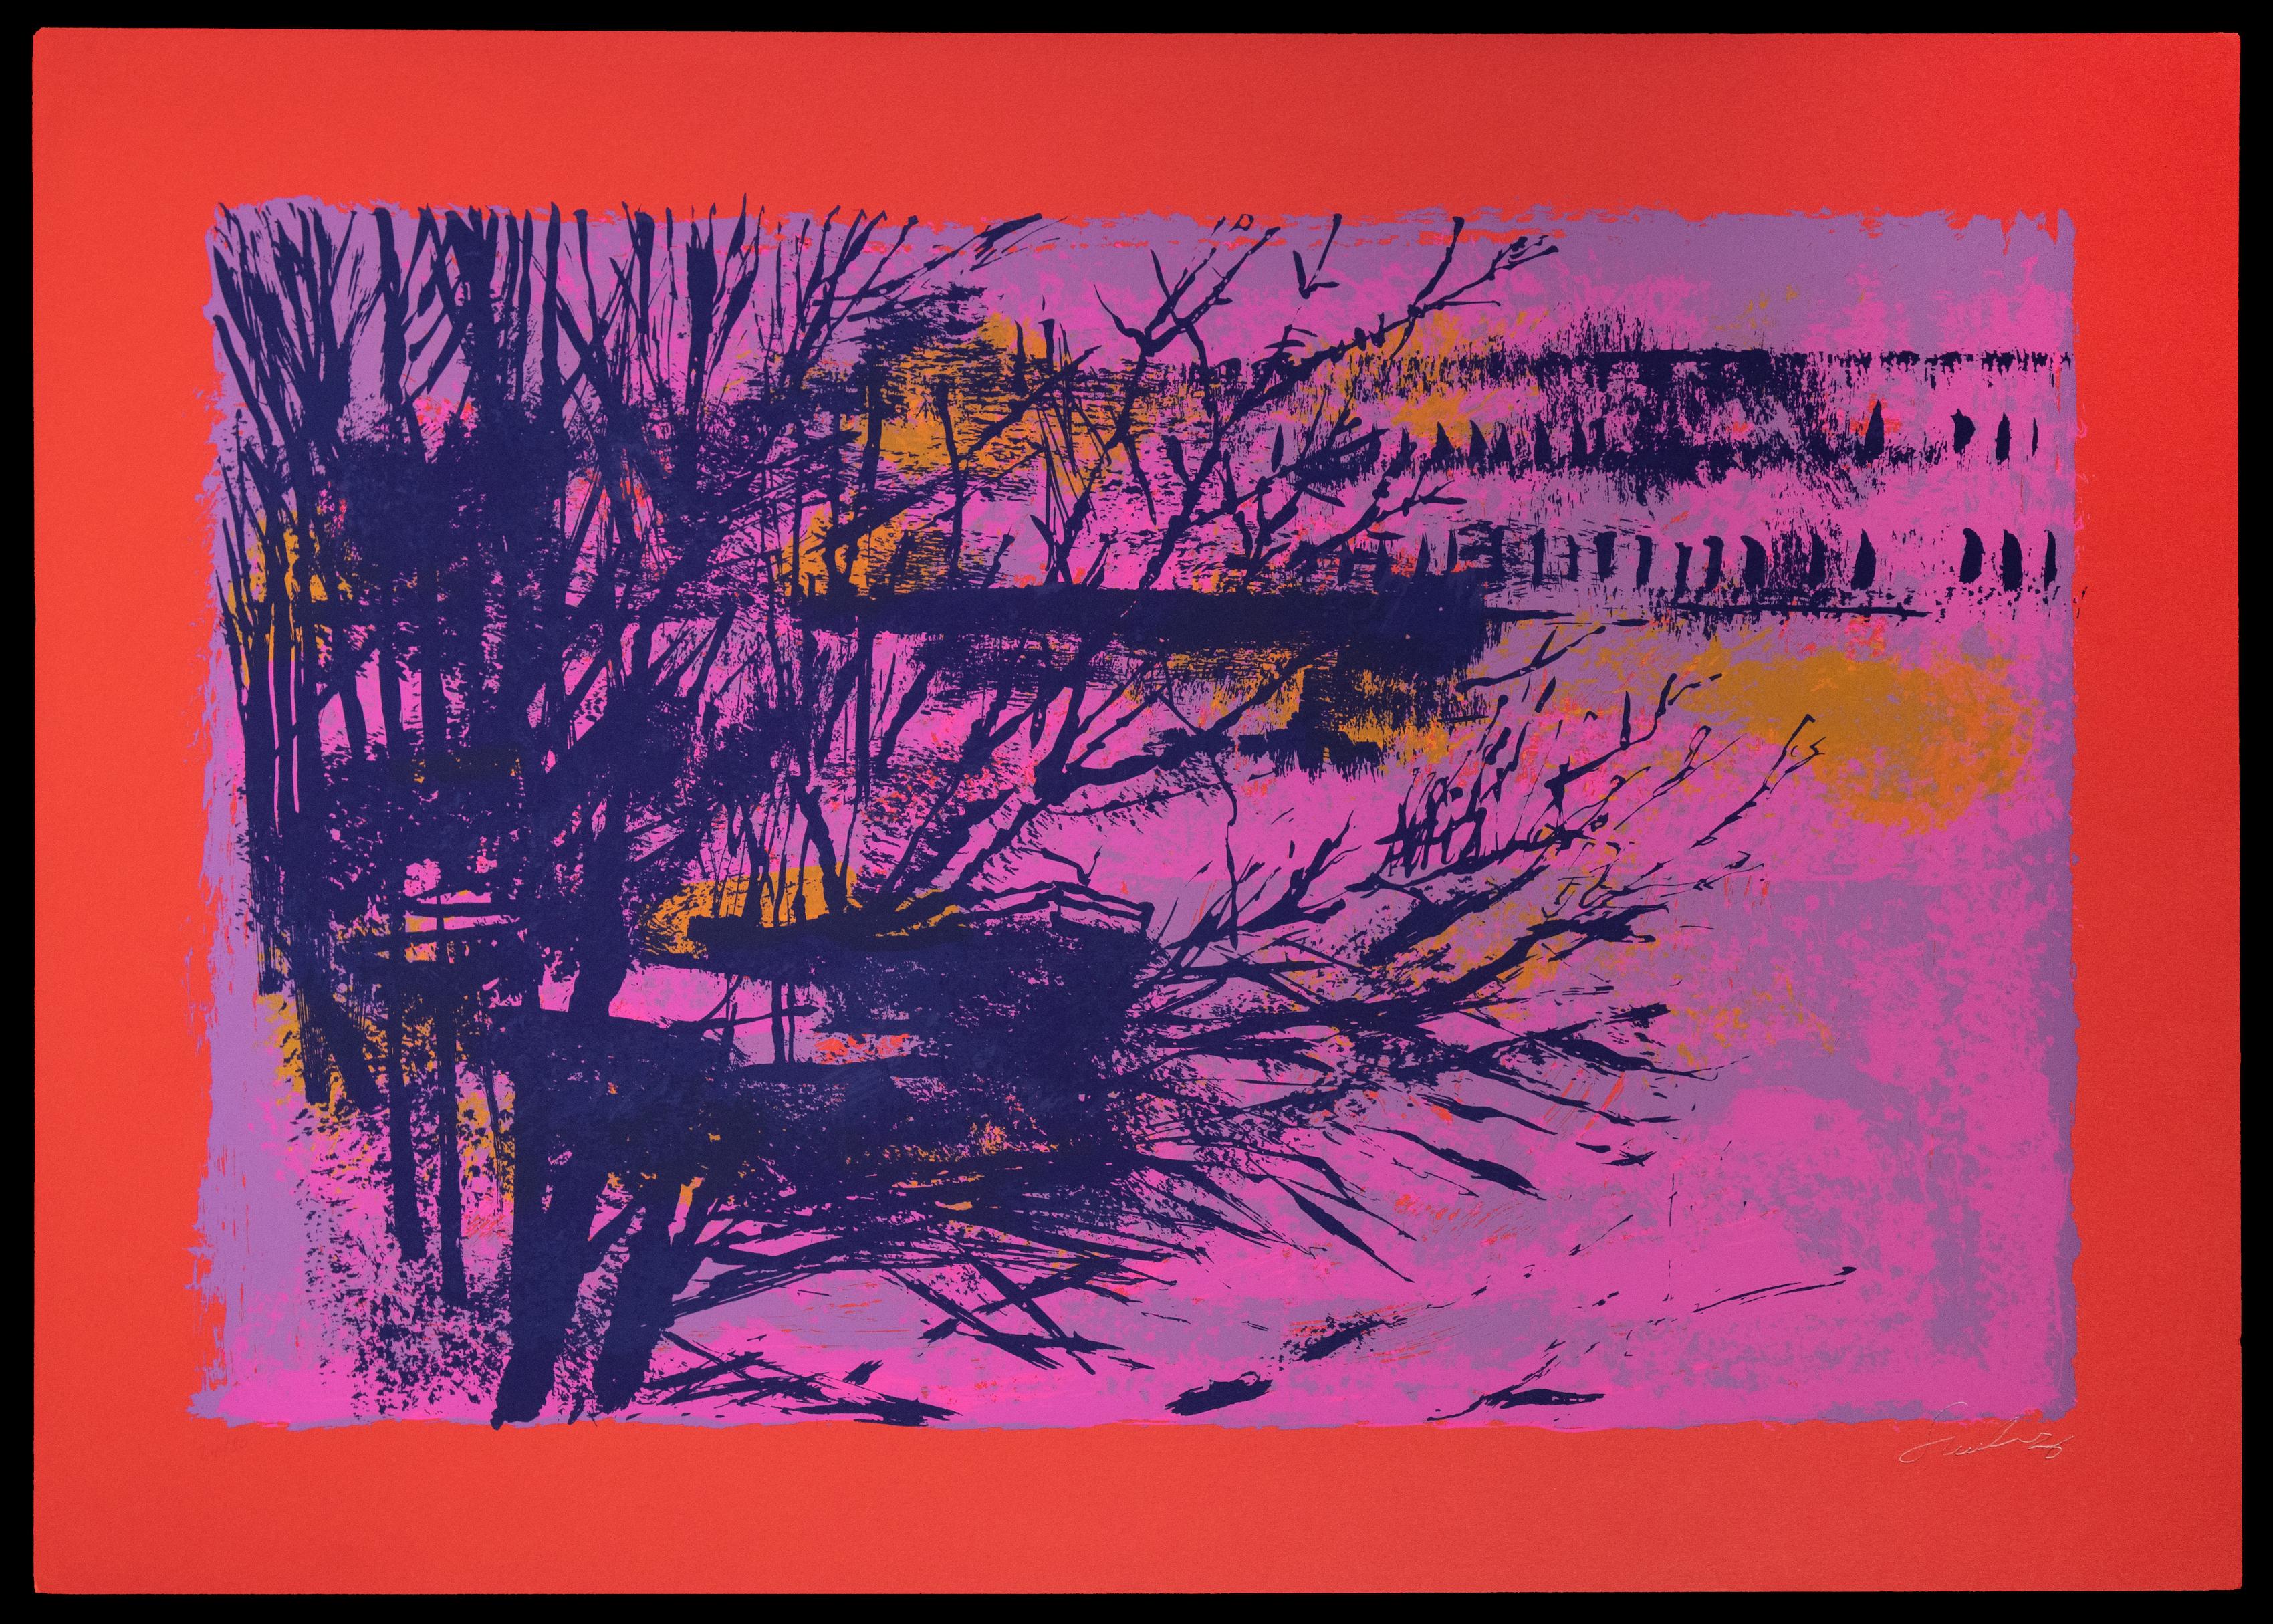 Red/Violet Landscape - Lithograph by Nicola Simbari - 1976